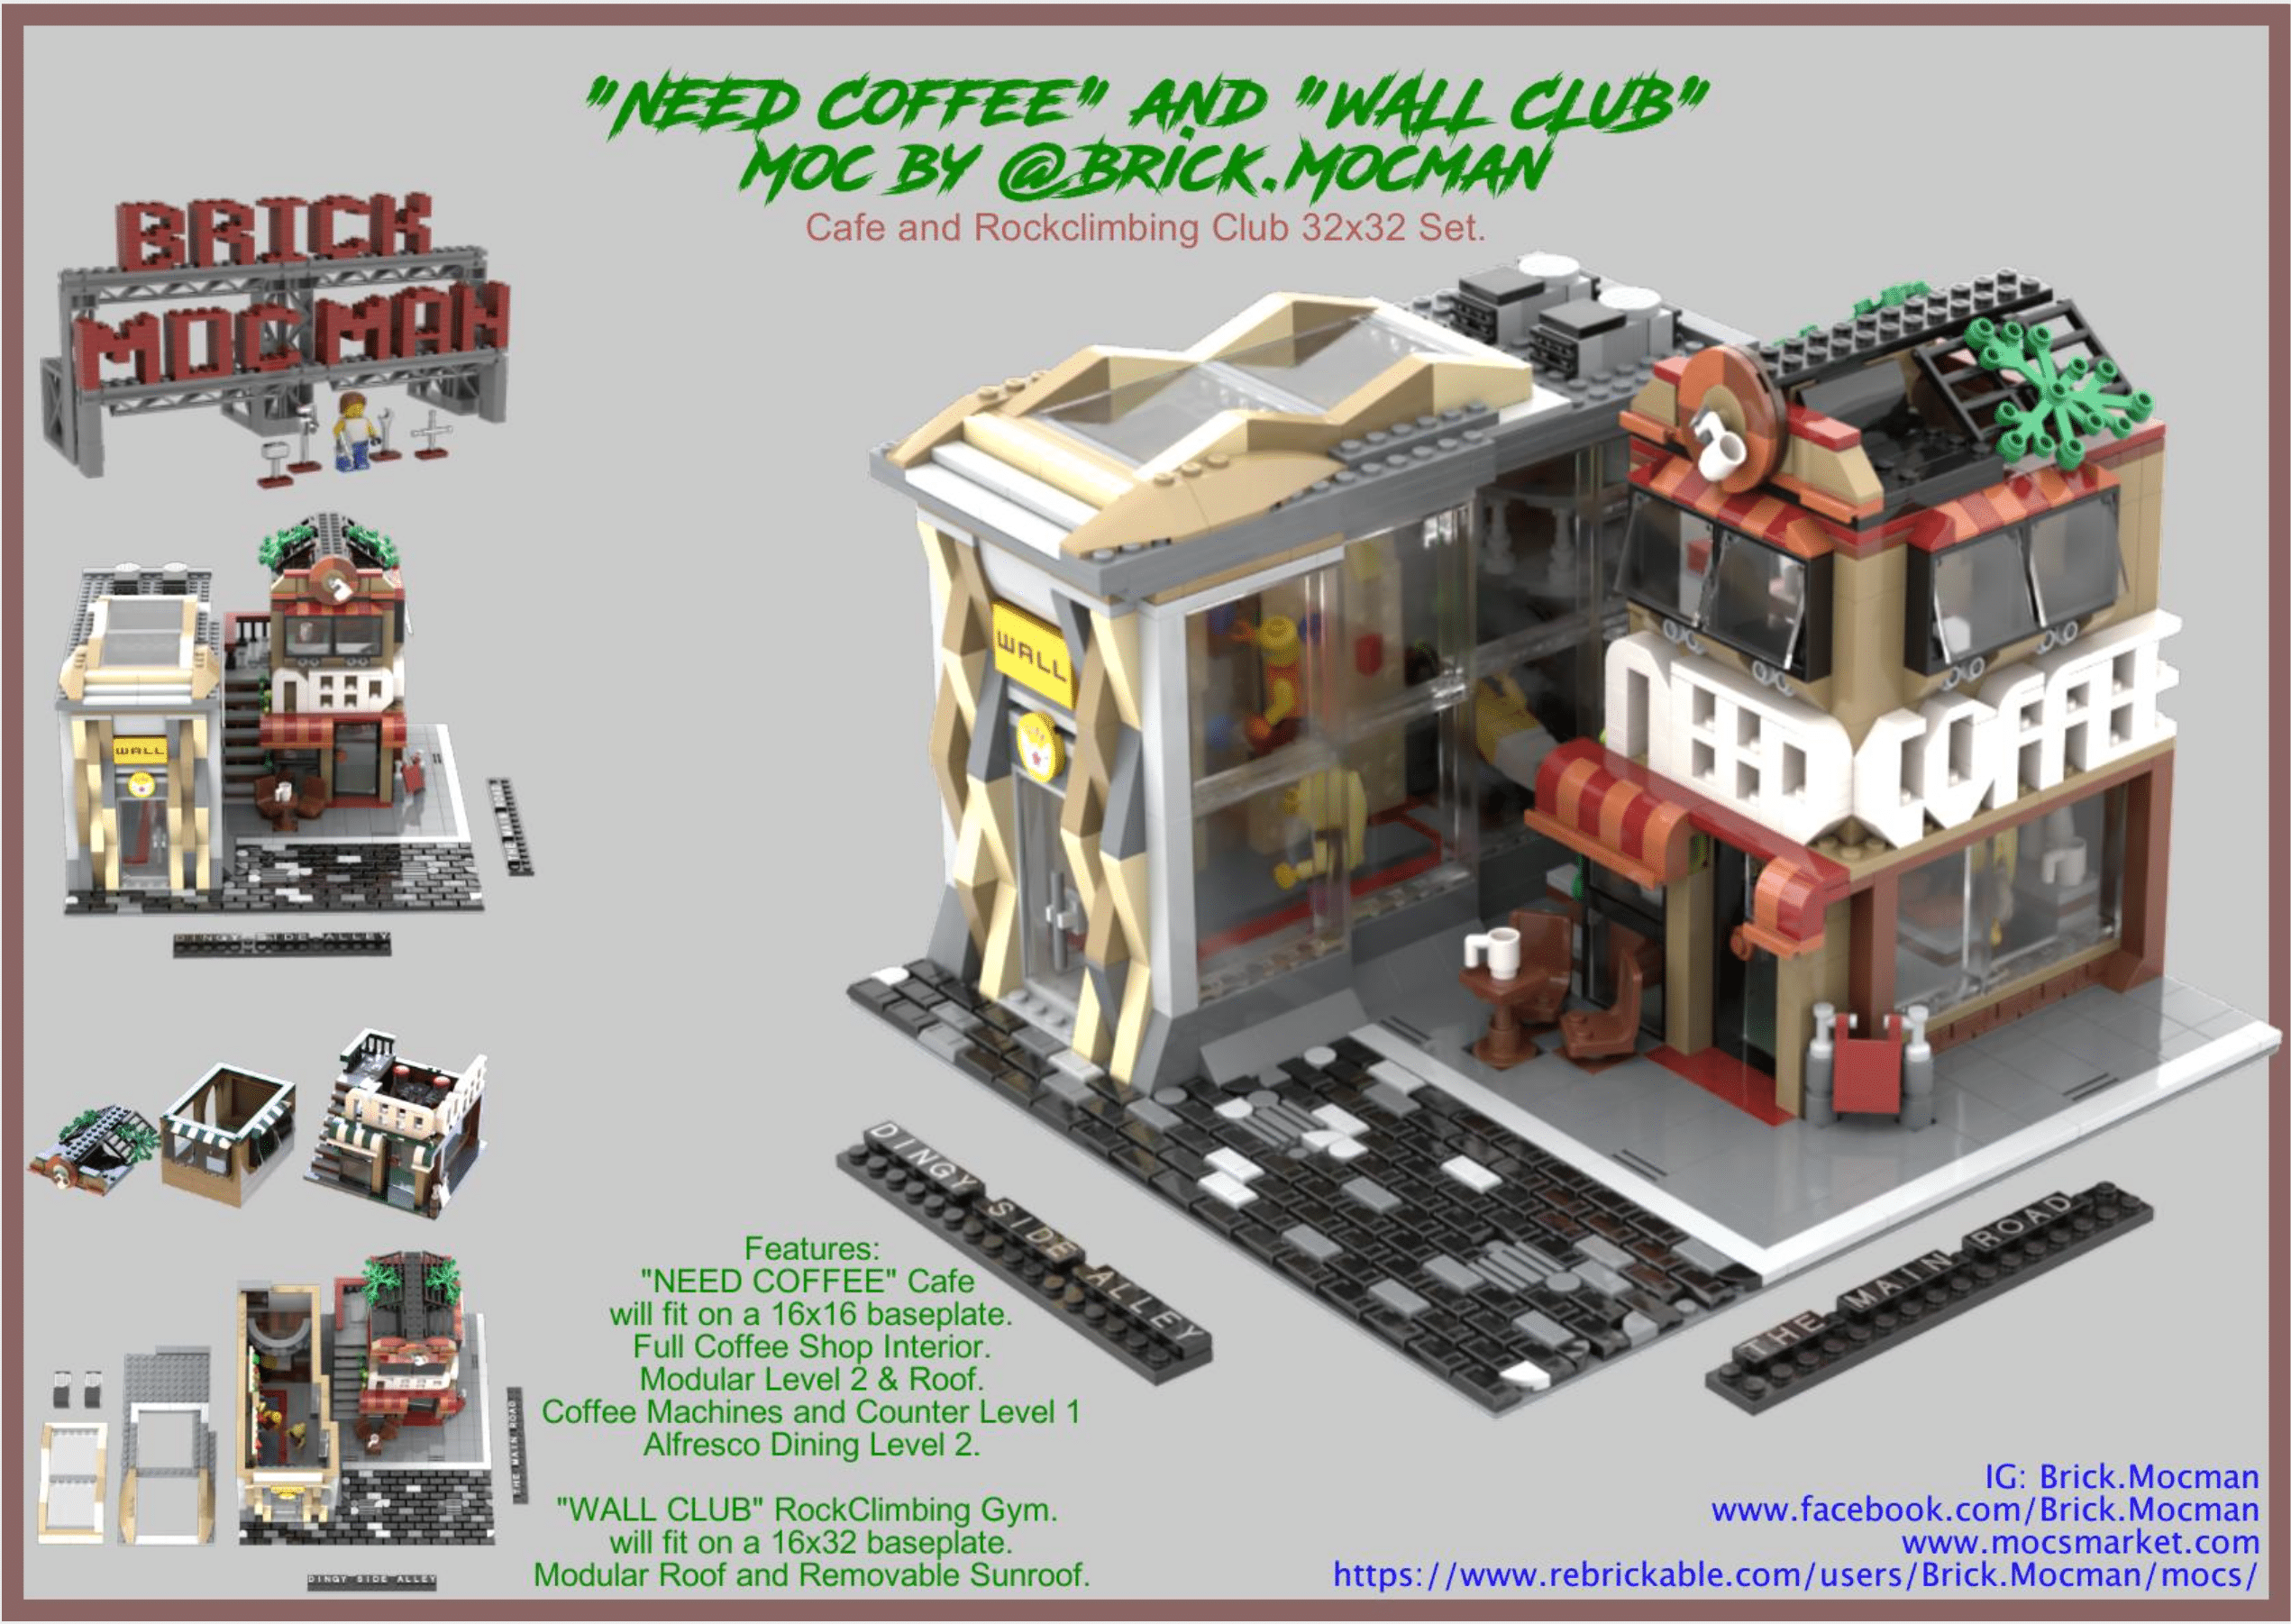 NEED COFFEE and WALL CLUB - 32x32 Cover